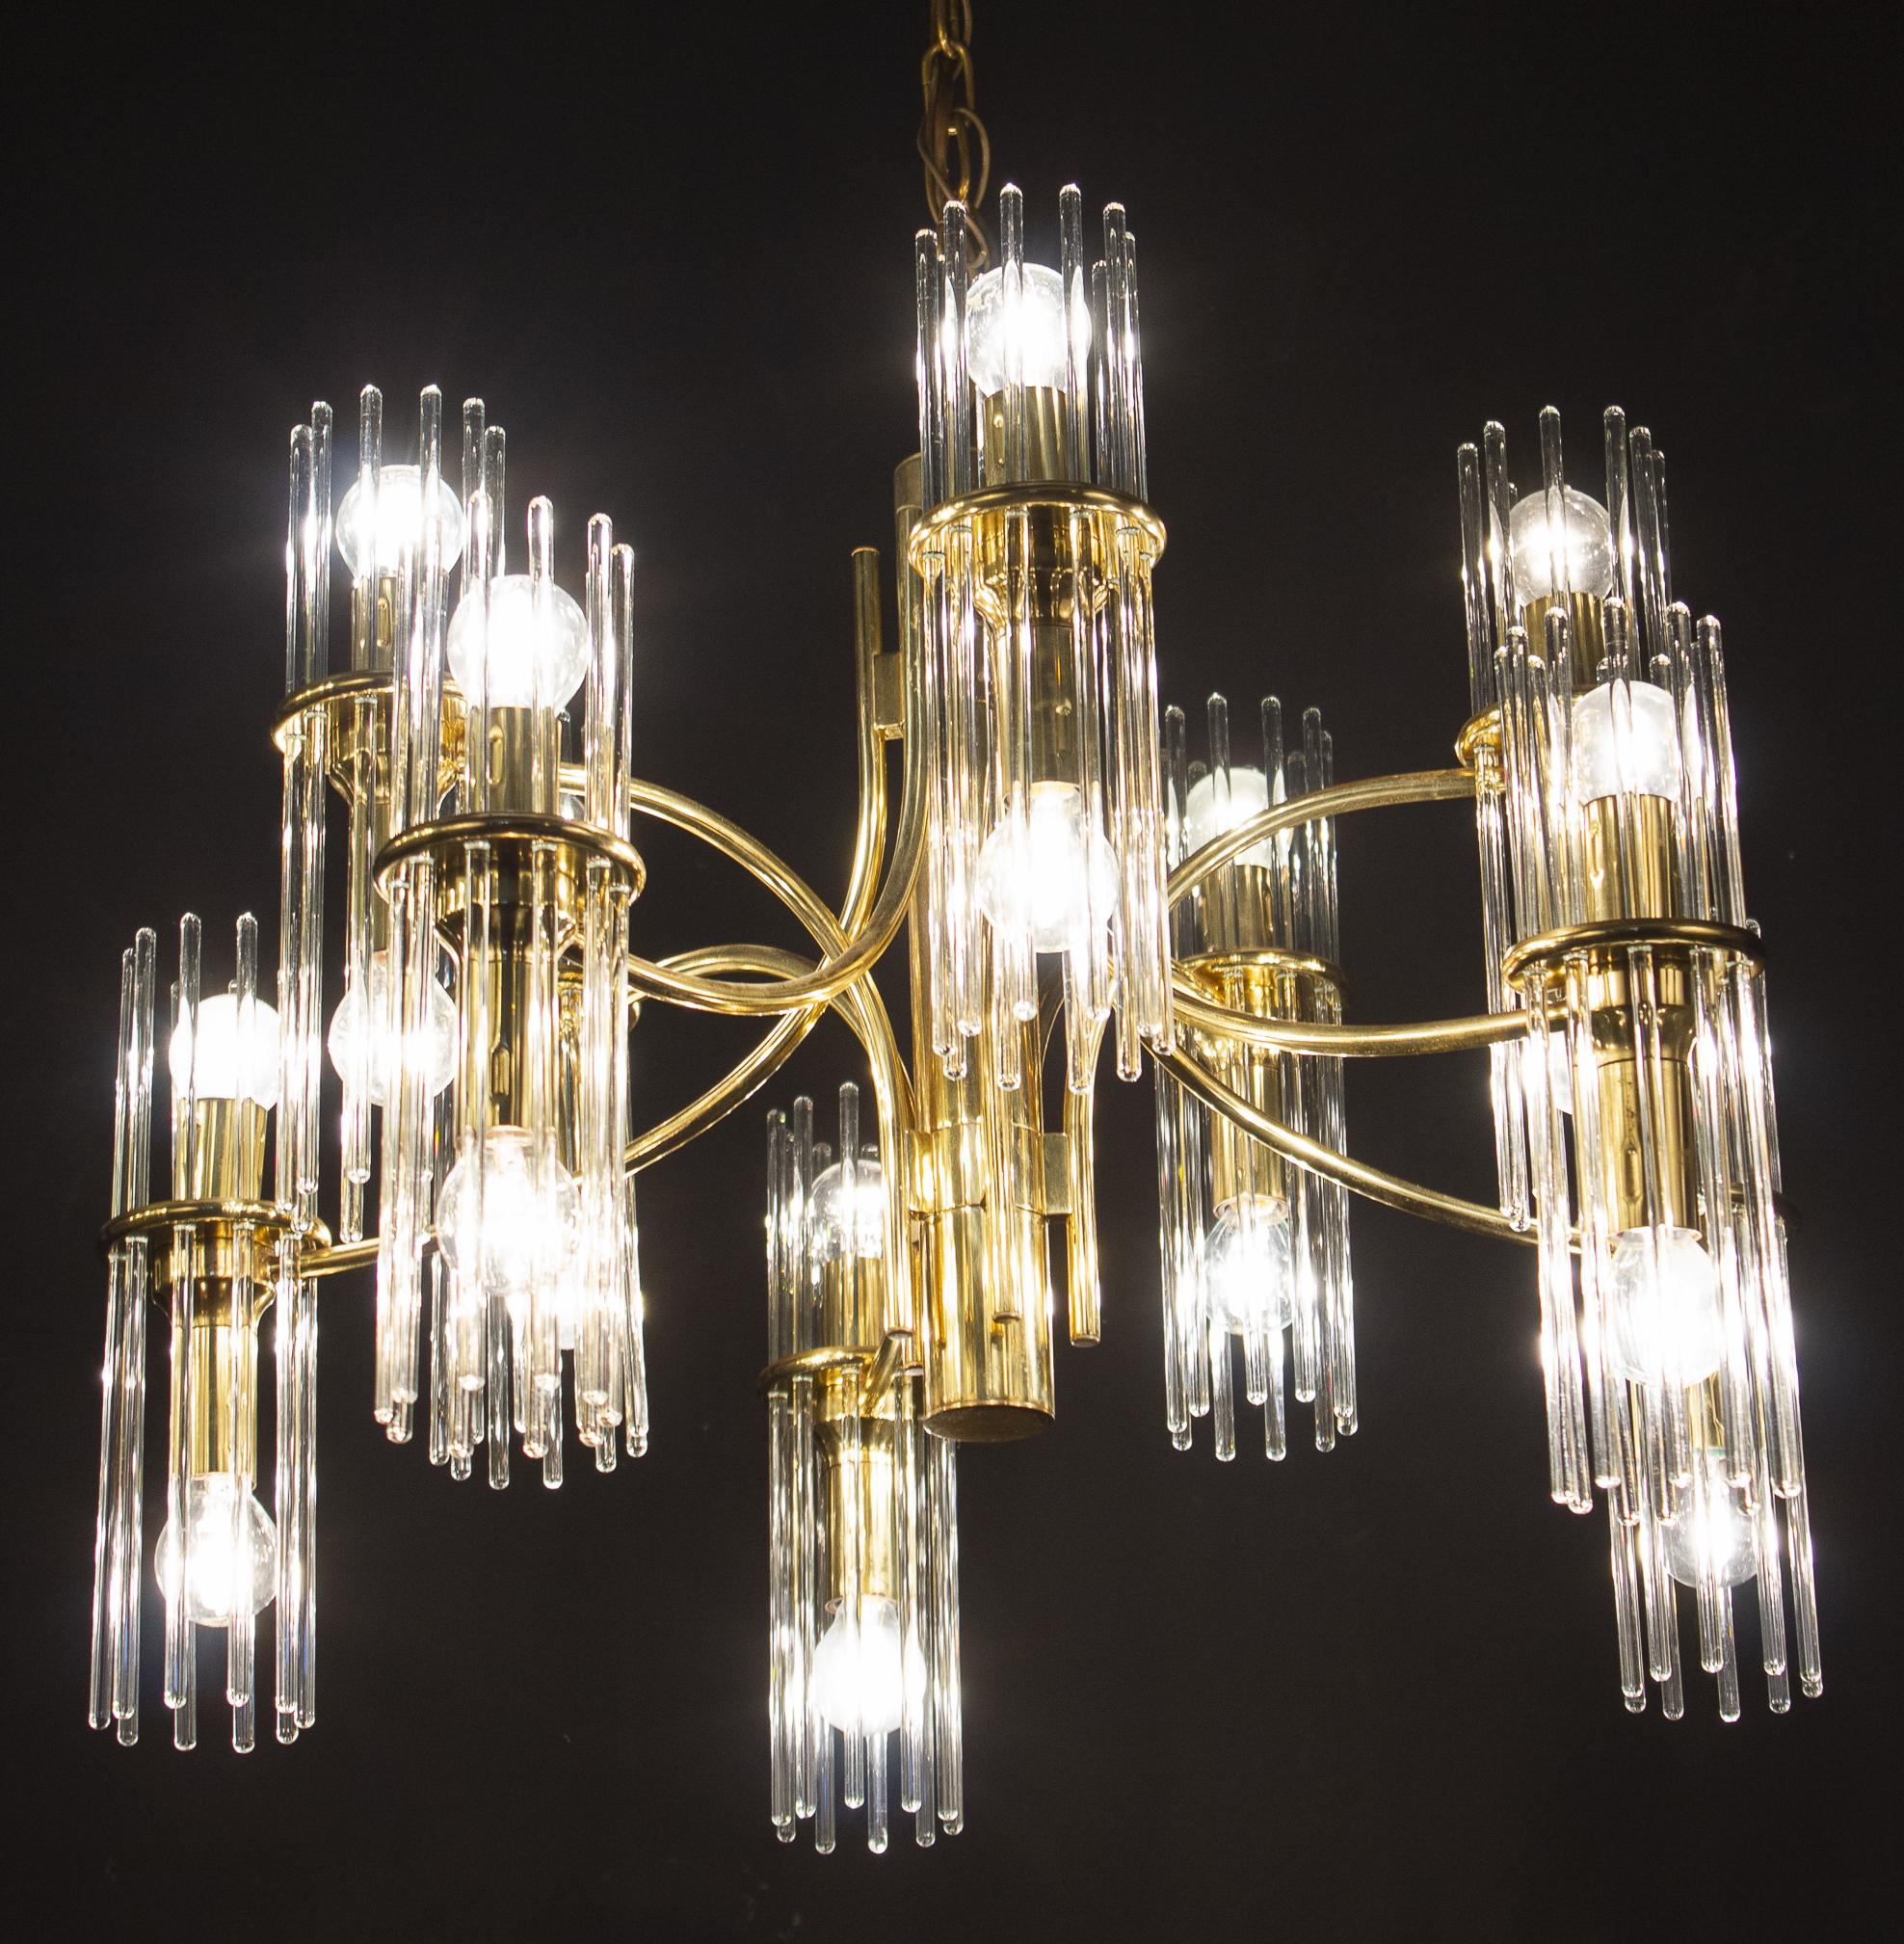 Pair of midcentury Gaetano Sciolari clears glass rod modernist chandeliers with brass frame.
Each with 20 E 14 light bulbs creates a fabulous light effect.

Excellent vintage condition.